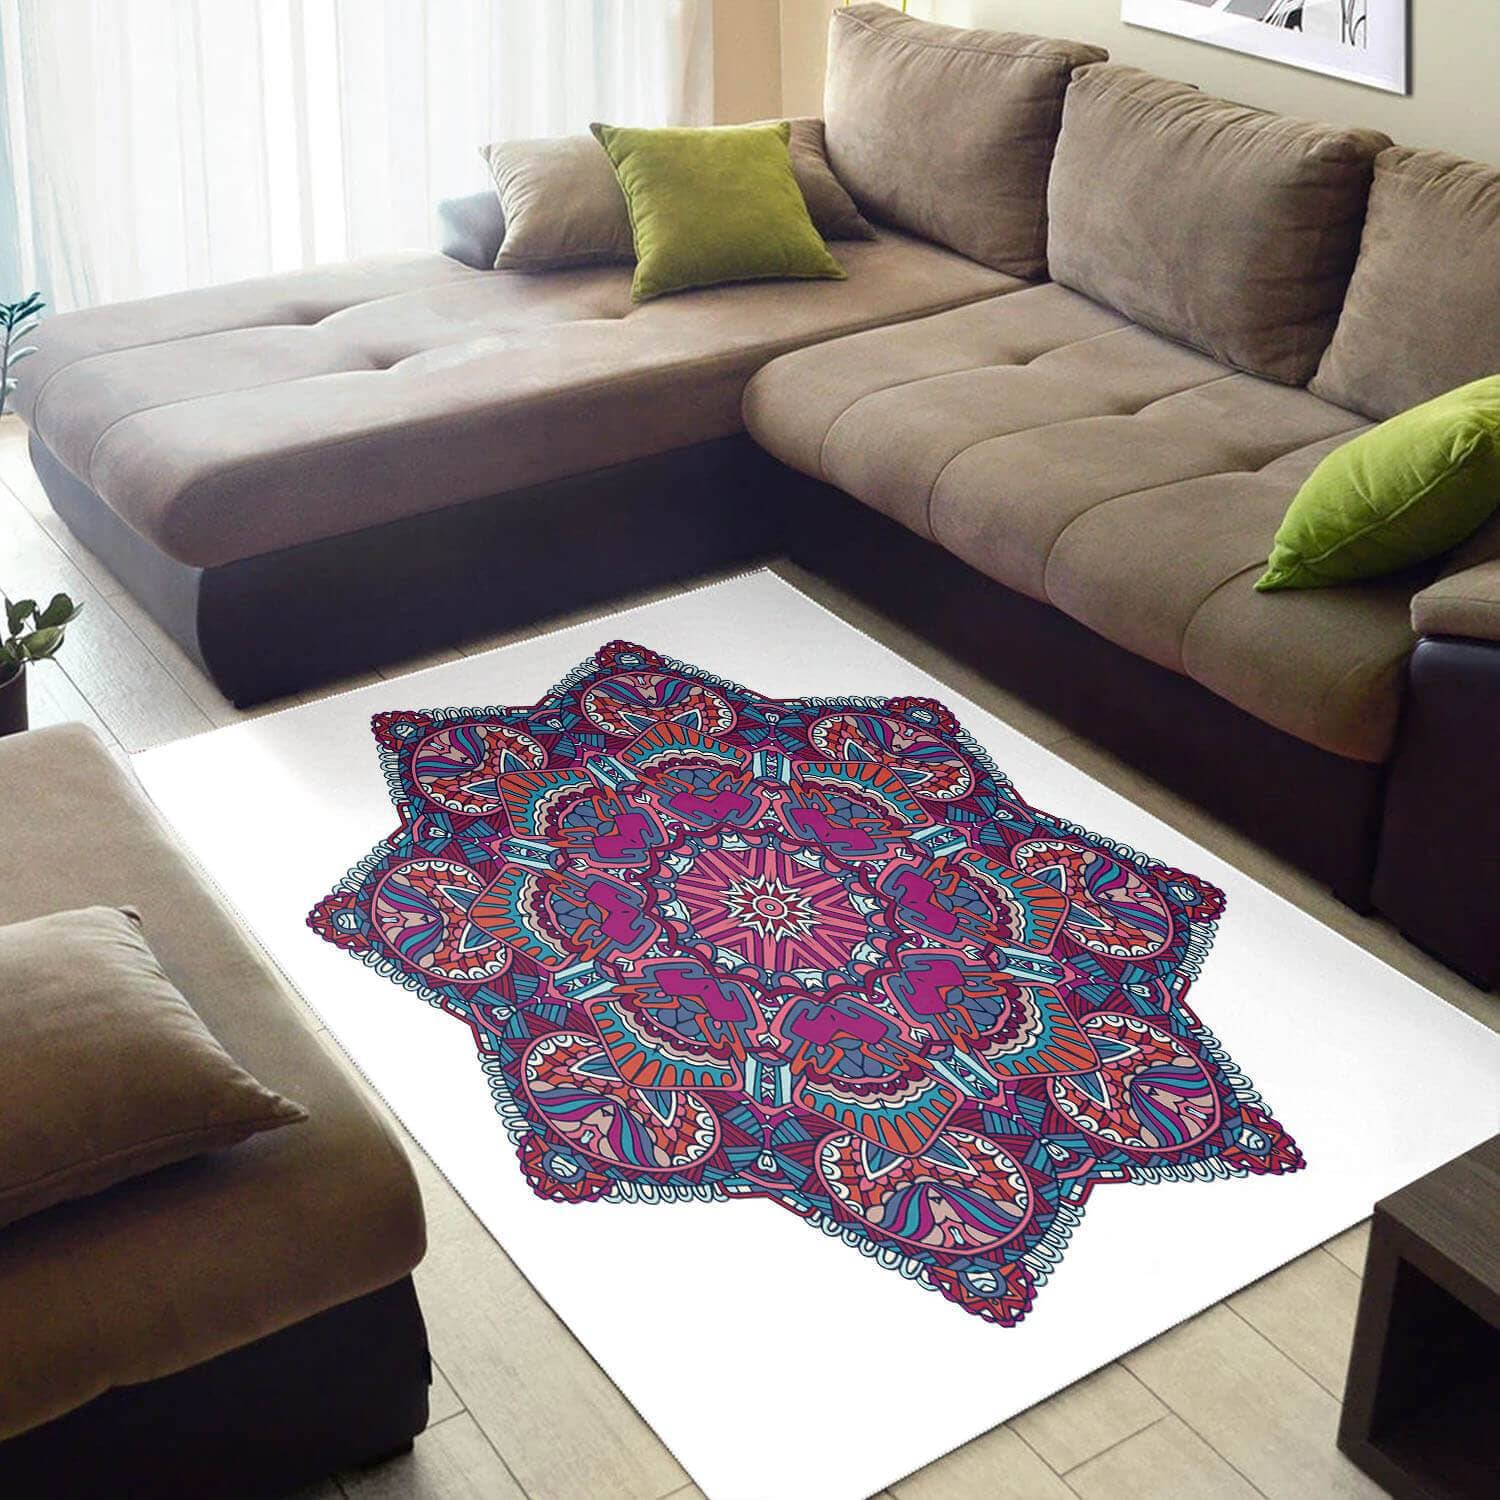 Nice African Style Retro Natural Hair Seamless Pattern Design Floor Carpet Inspired Home Rug